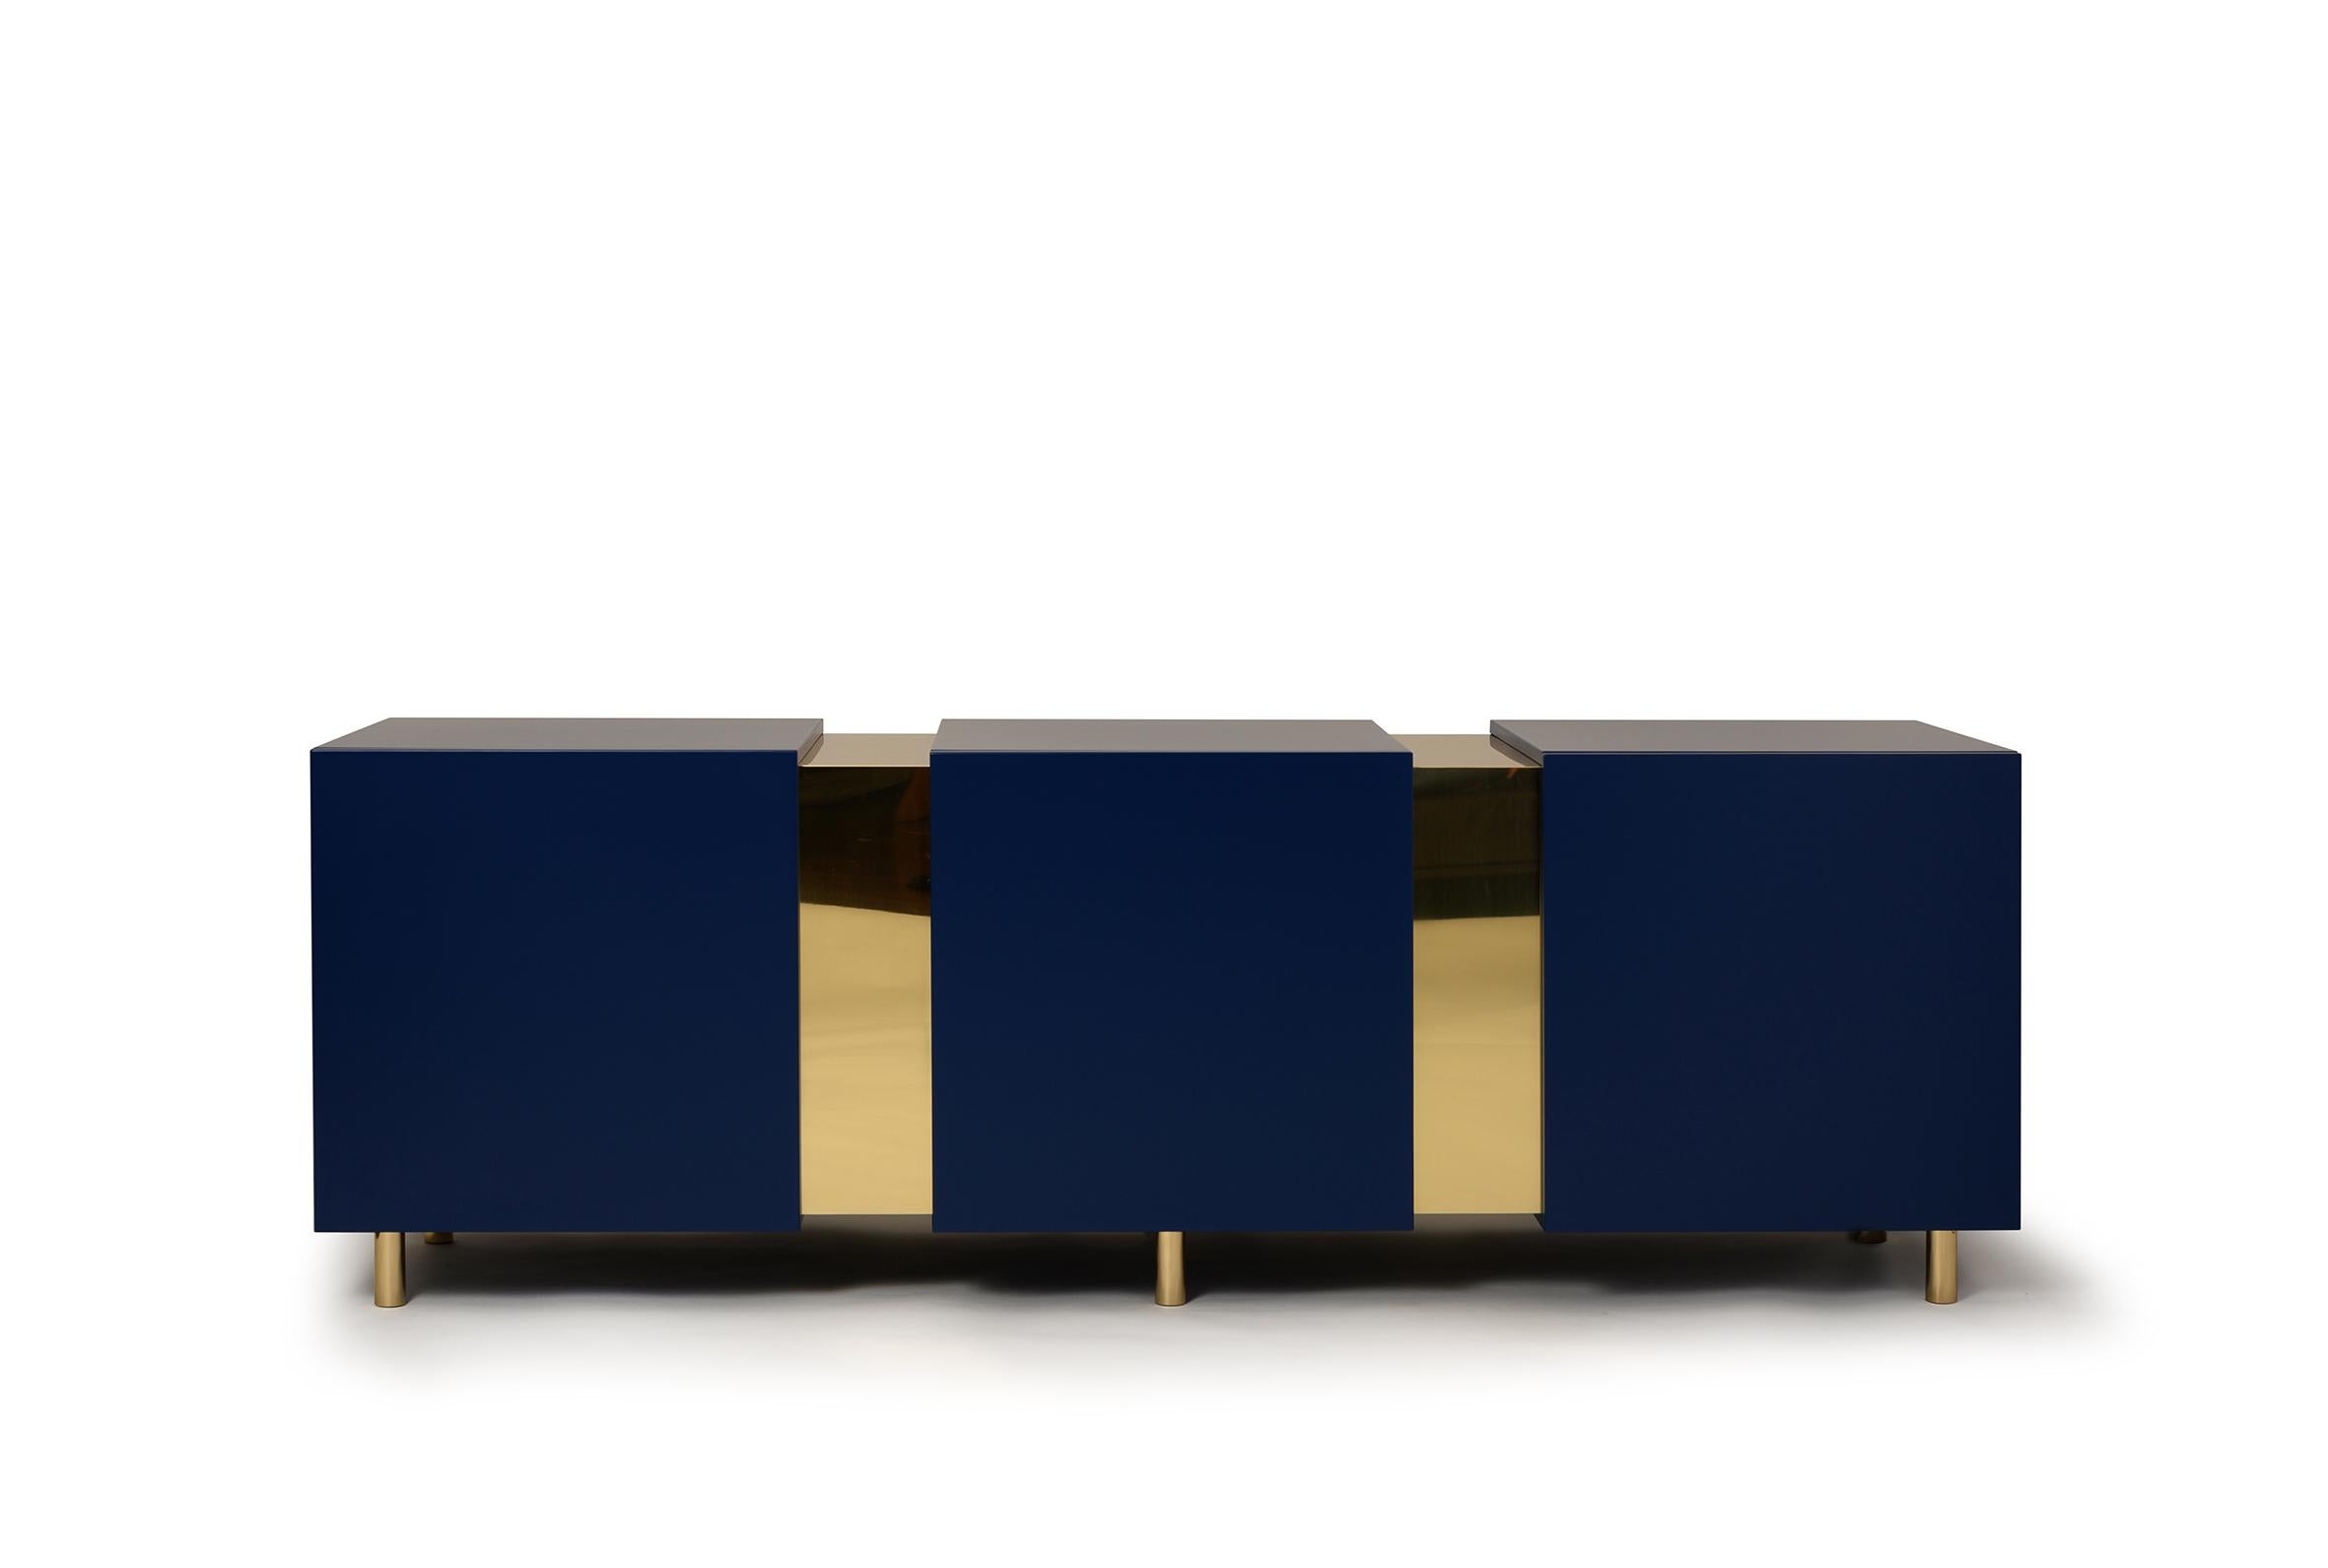 Eunduetrè is a low storage system which punctuates the space and plays with contrasting effects. Extremely simple in its geometric shapes, this sideboard/credenza alternates colorful cubes in matt lacquered wood, with sections of bent brass sheet